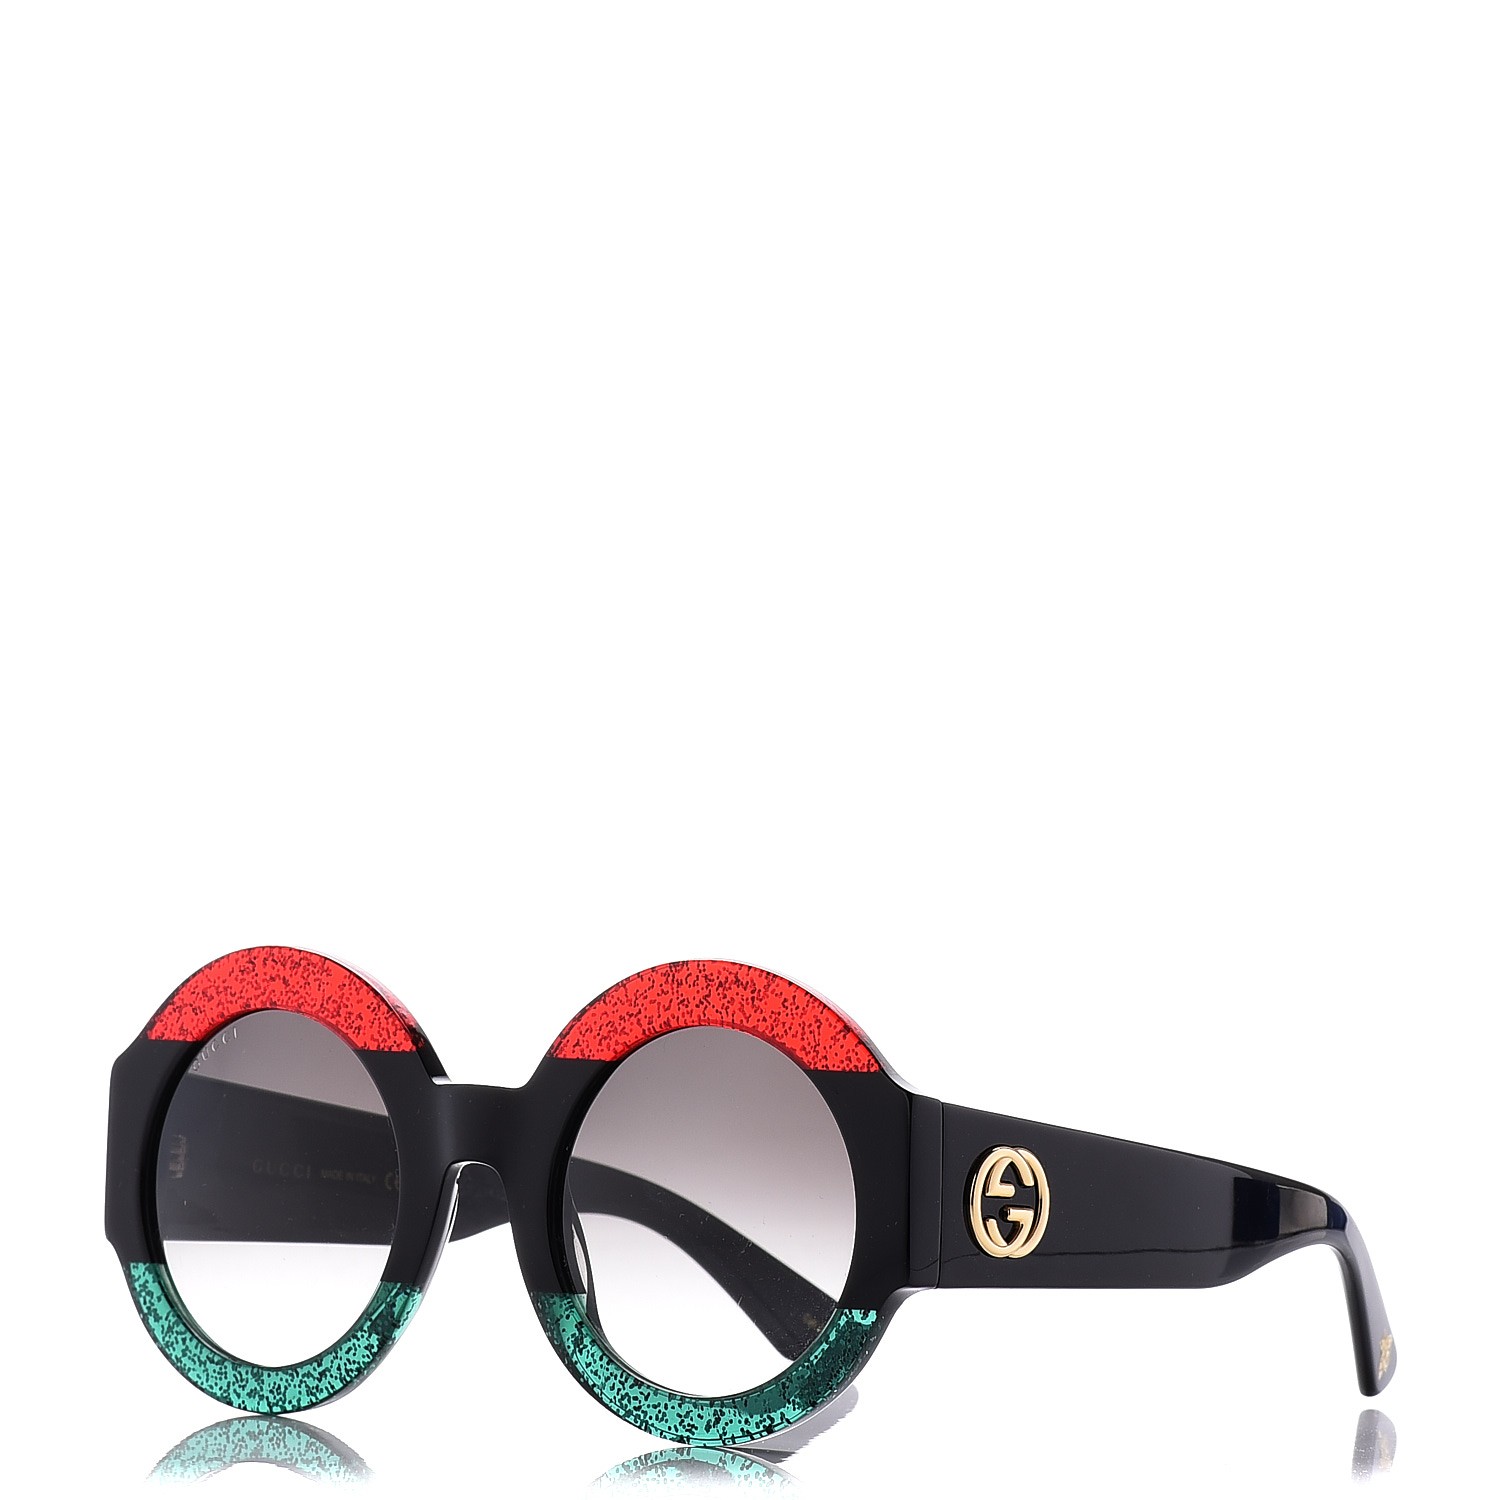 gucci green and red sunglasses